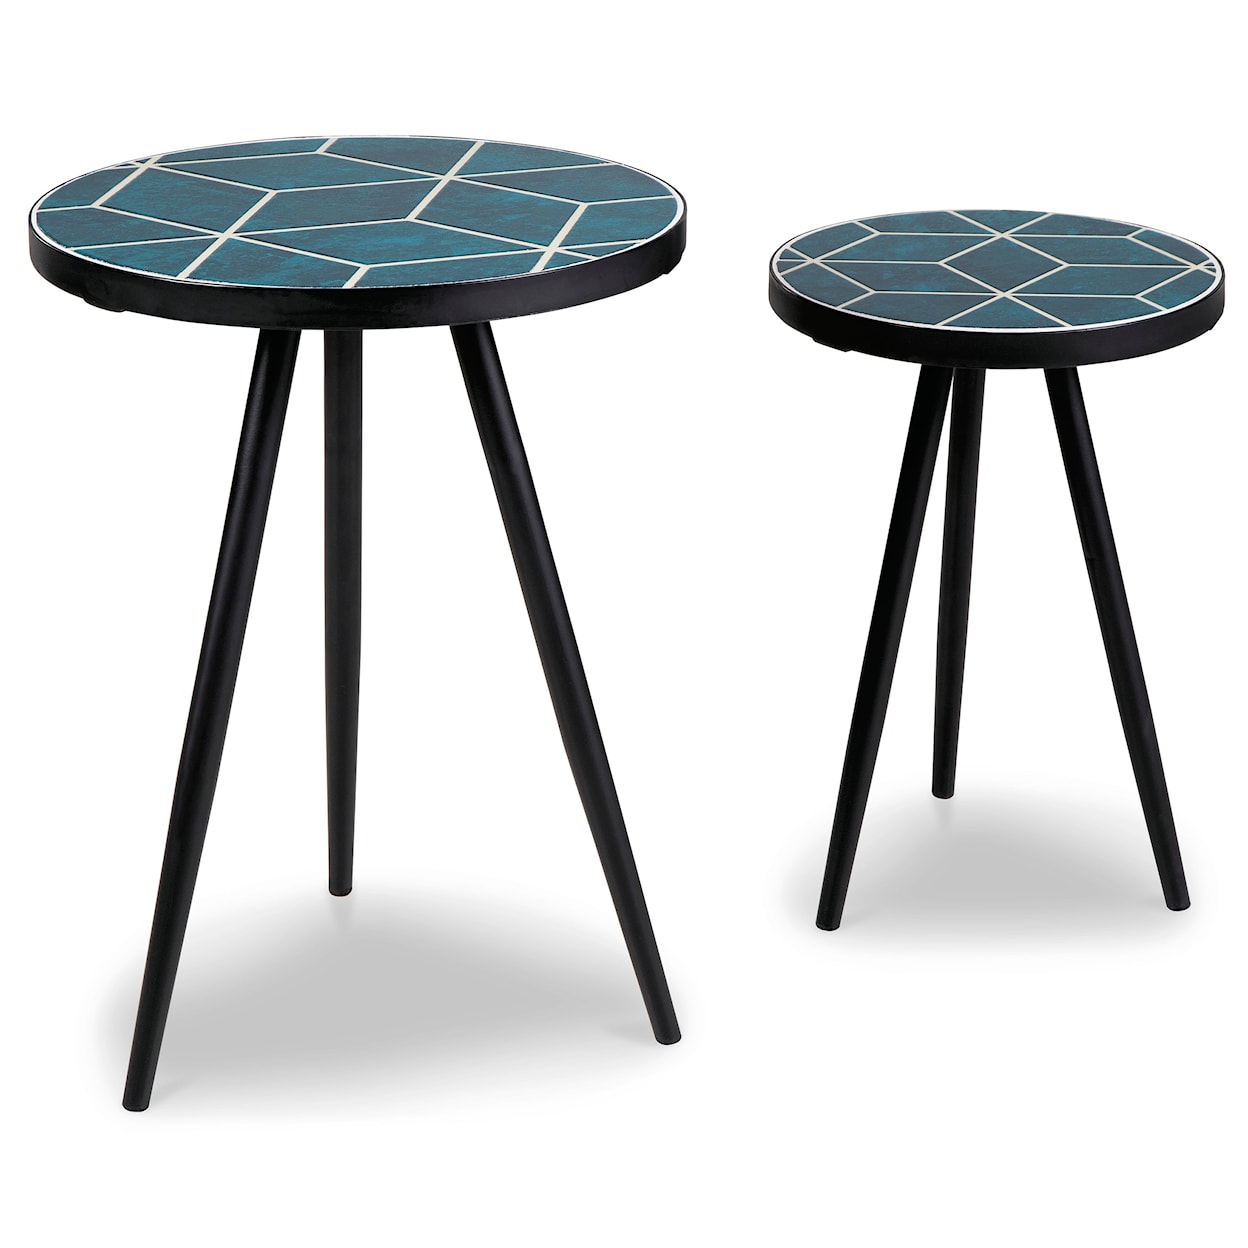 Michael Alan Select Clairbelle Accent Table (Set of 2)